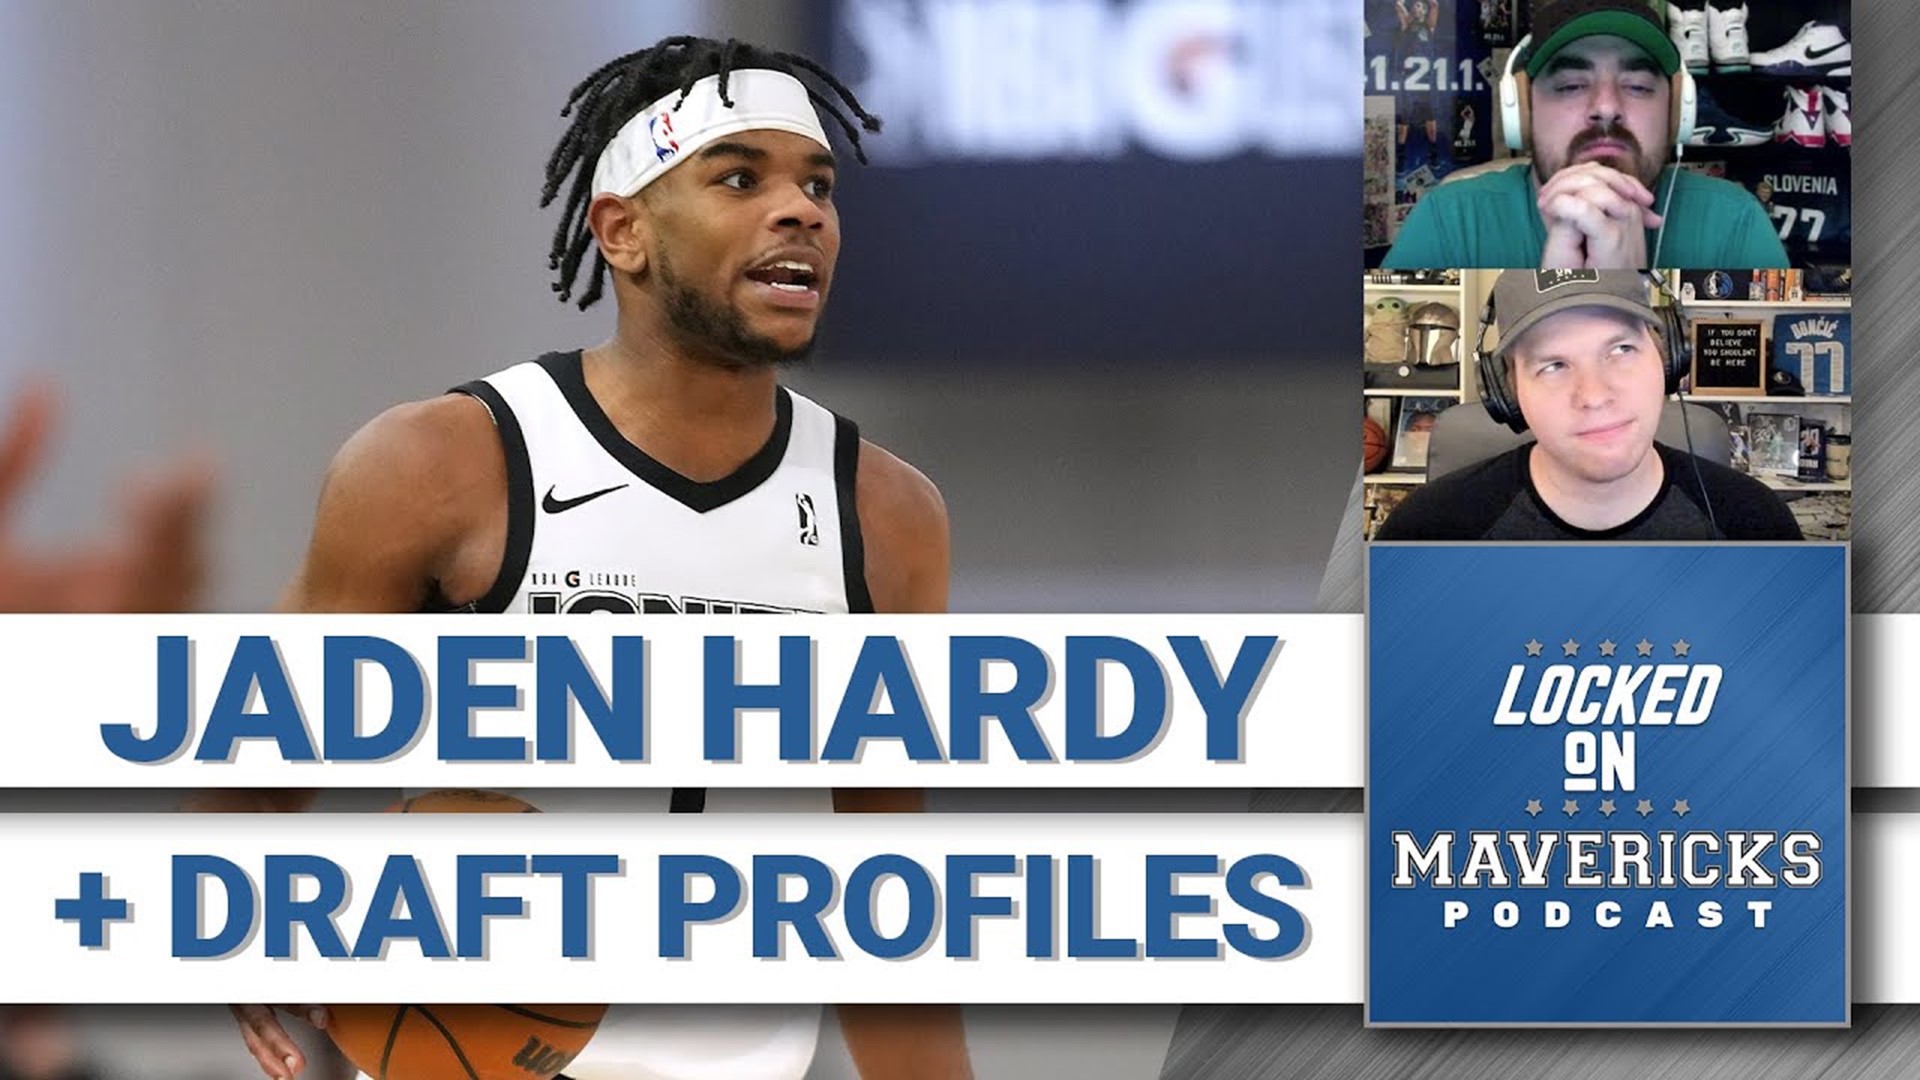 G-League Ignite Guard Jaden Hardy is a dynamic isolation scorer but struggled with efficiency. Would he be a great BIG SWING for the Mavs in the 2022 NBA Draft?